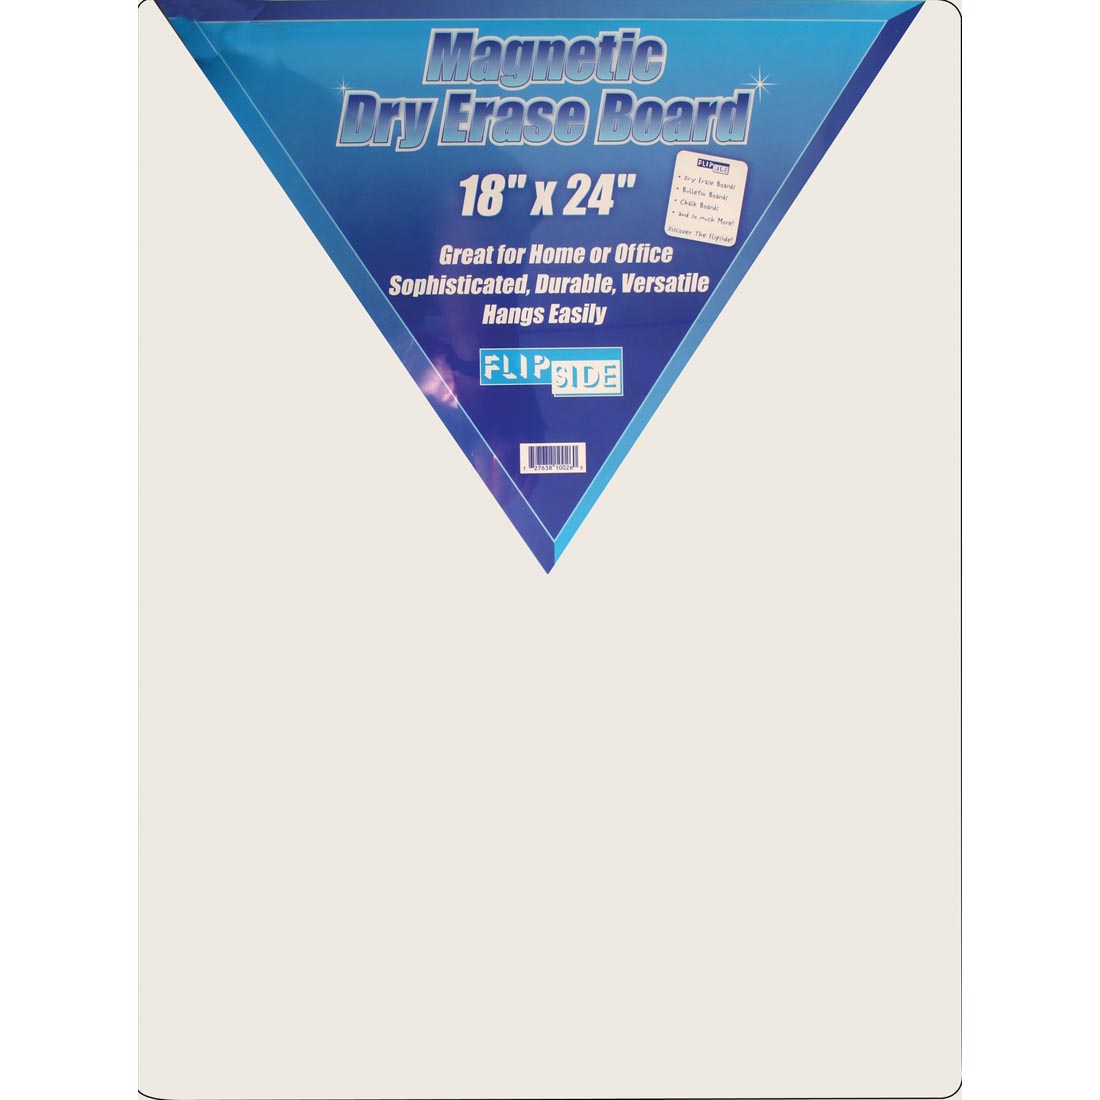 18x24" Magnetic Dry Erase Board